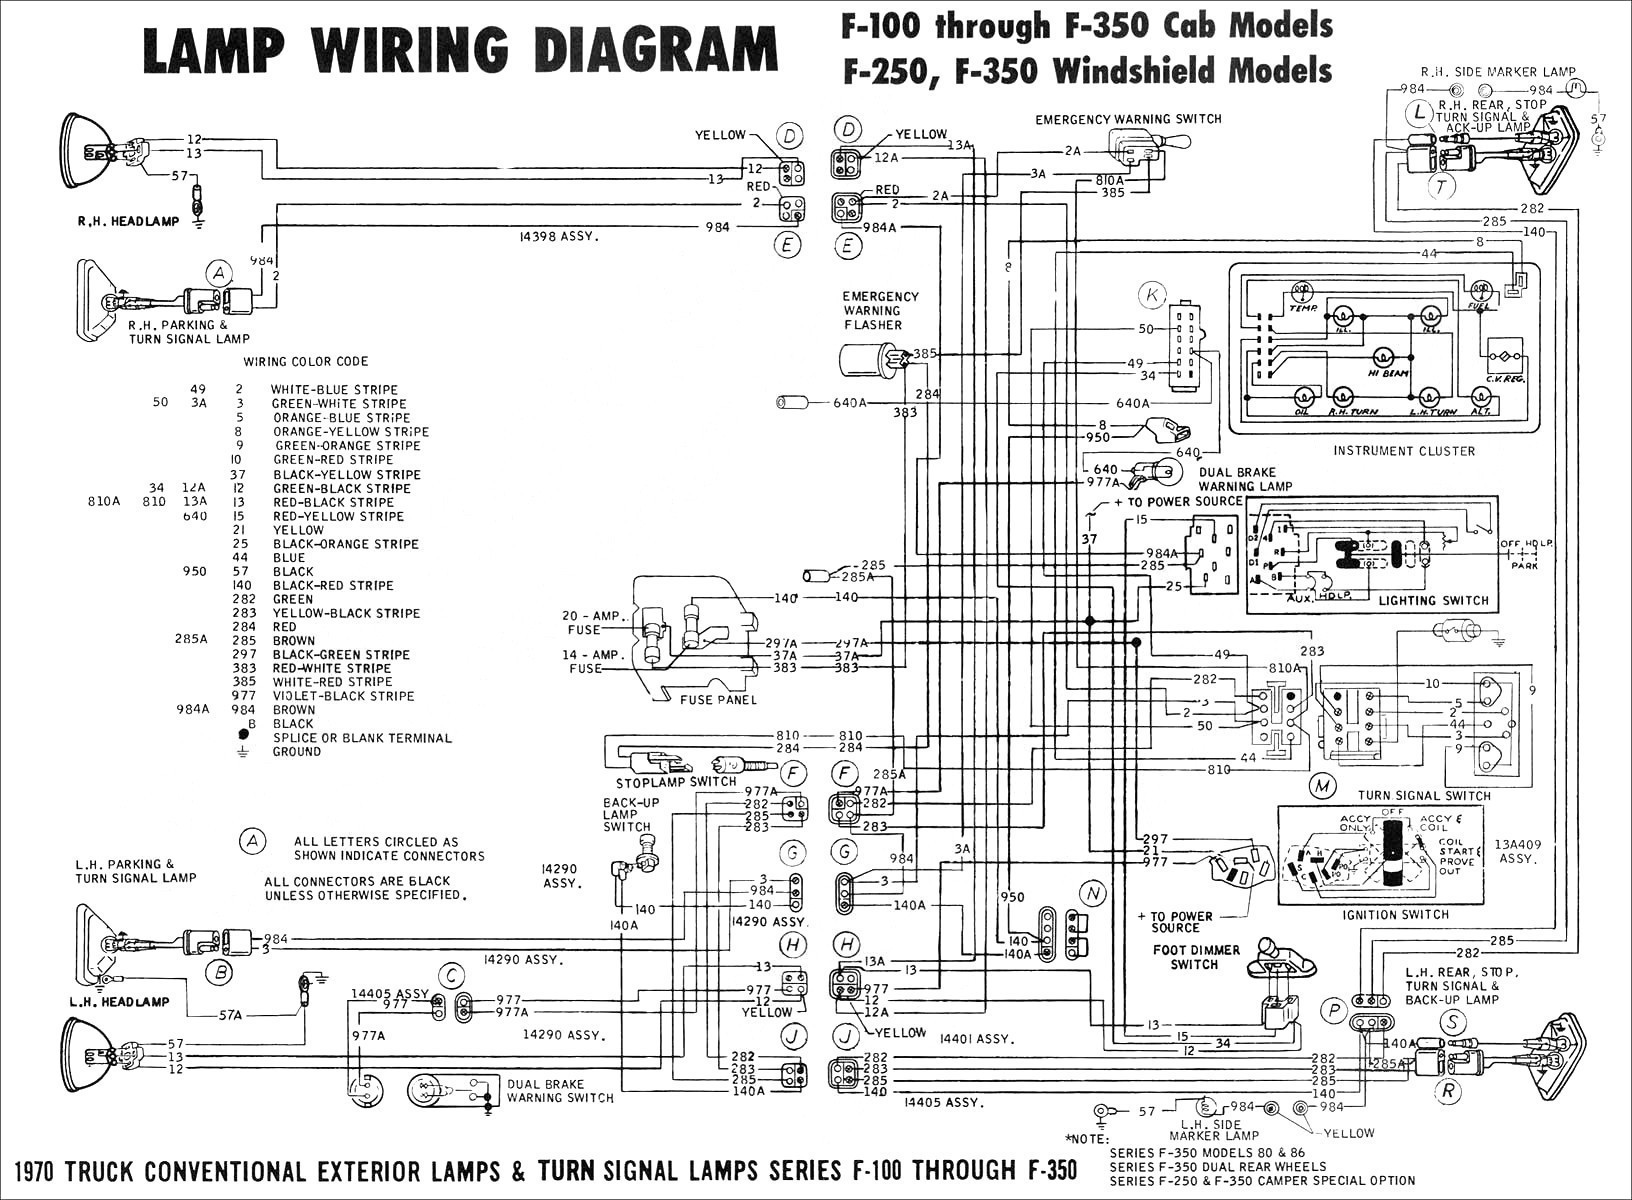 Rs232 To Rj45 Wiring Diagram Reference Got A Wiring Diagram From Http Wikidiyfaqorguk 0 0d S Wire